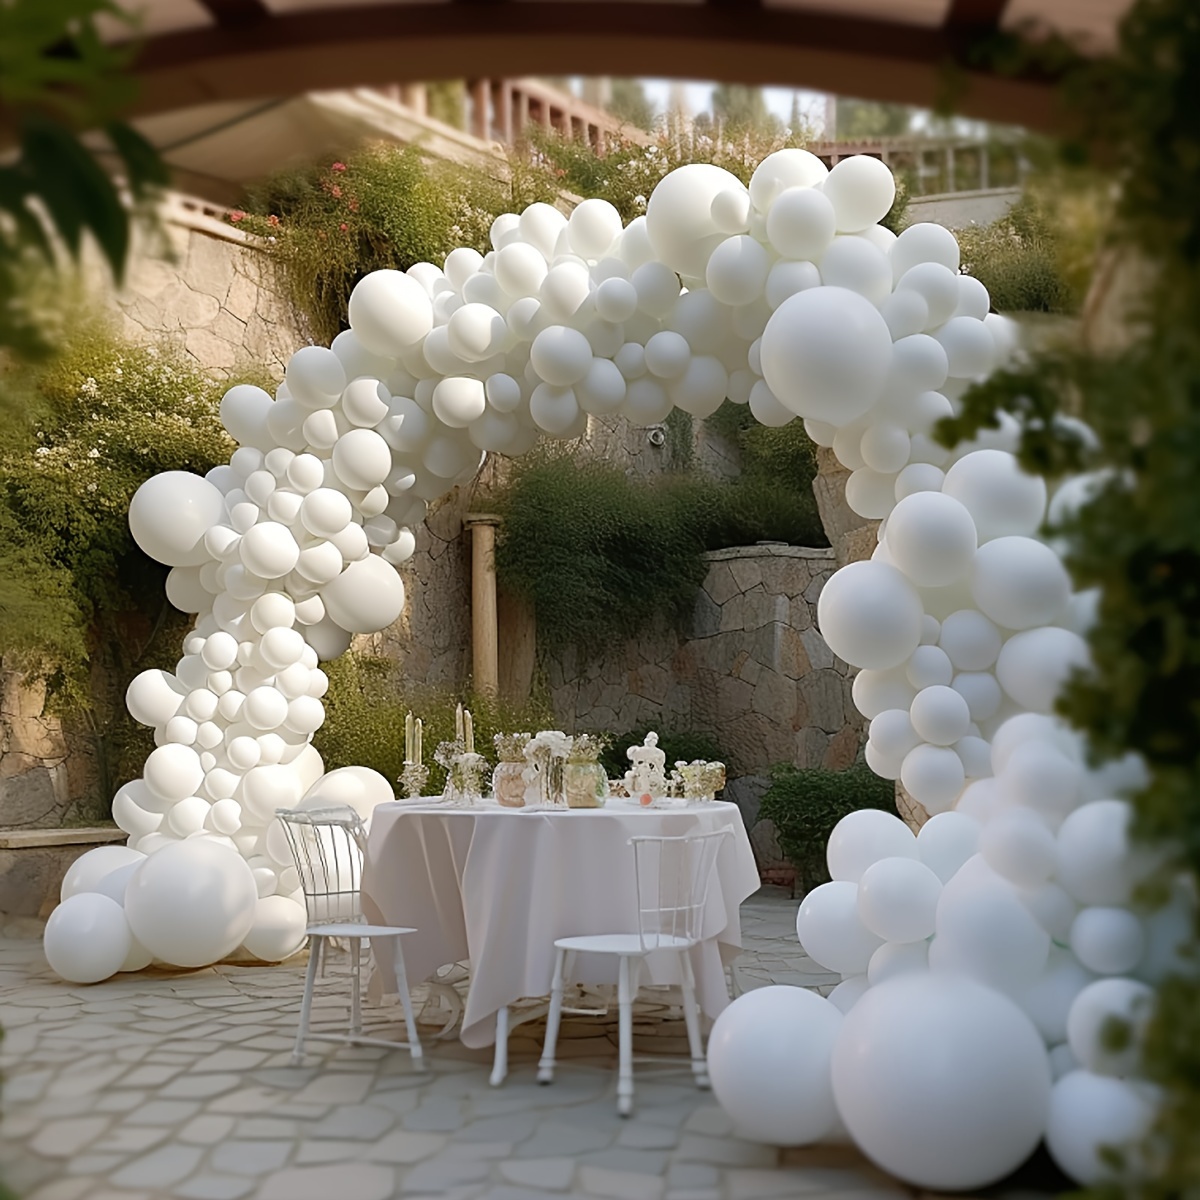 

130pcs White Latex Balloons Set For Wedding, Bridal Shower, Birthday, Anniversary, Universal Occasions - Includes Multiple Components, Suitable For Ages 8+ - Emulsion Material, No Electricity Needed